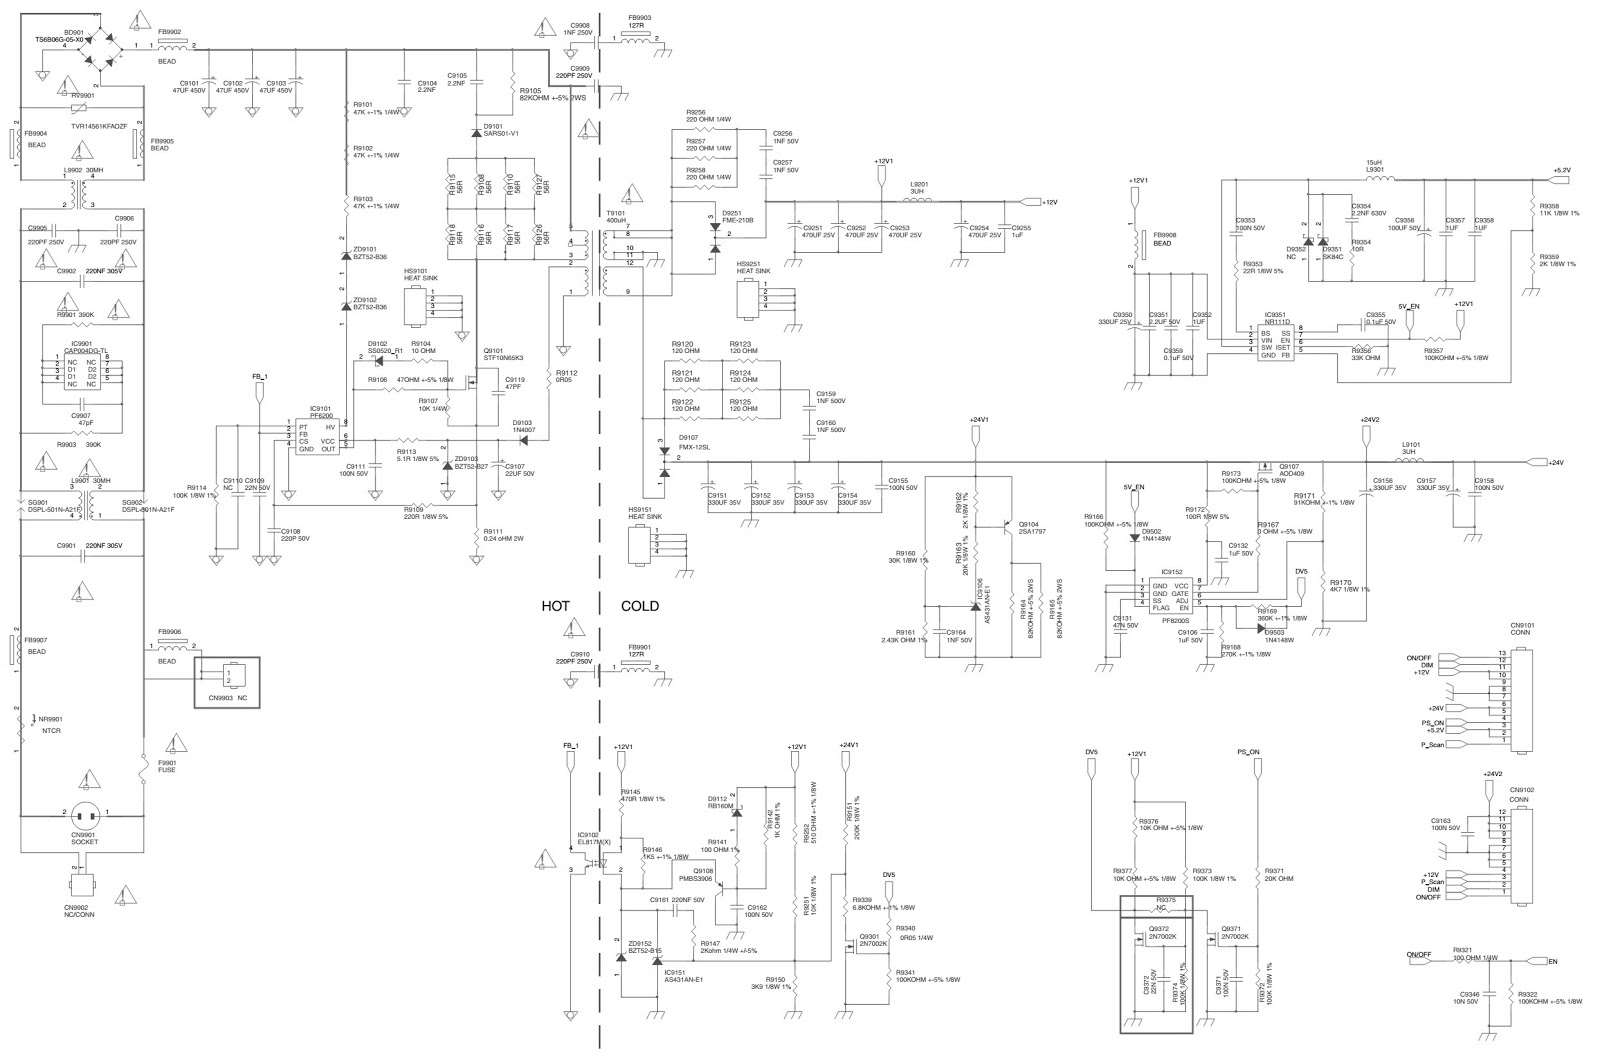 Electro help: A715G5793 - Philips LED LCD TV - SMPS - Circuit Diagram